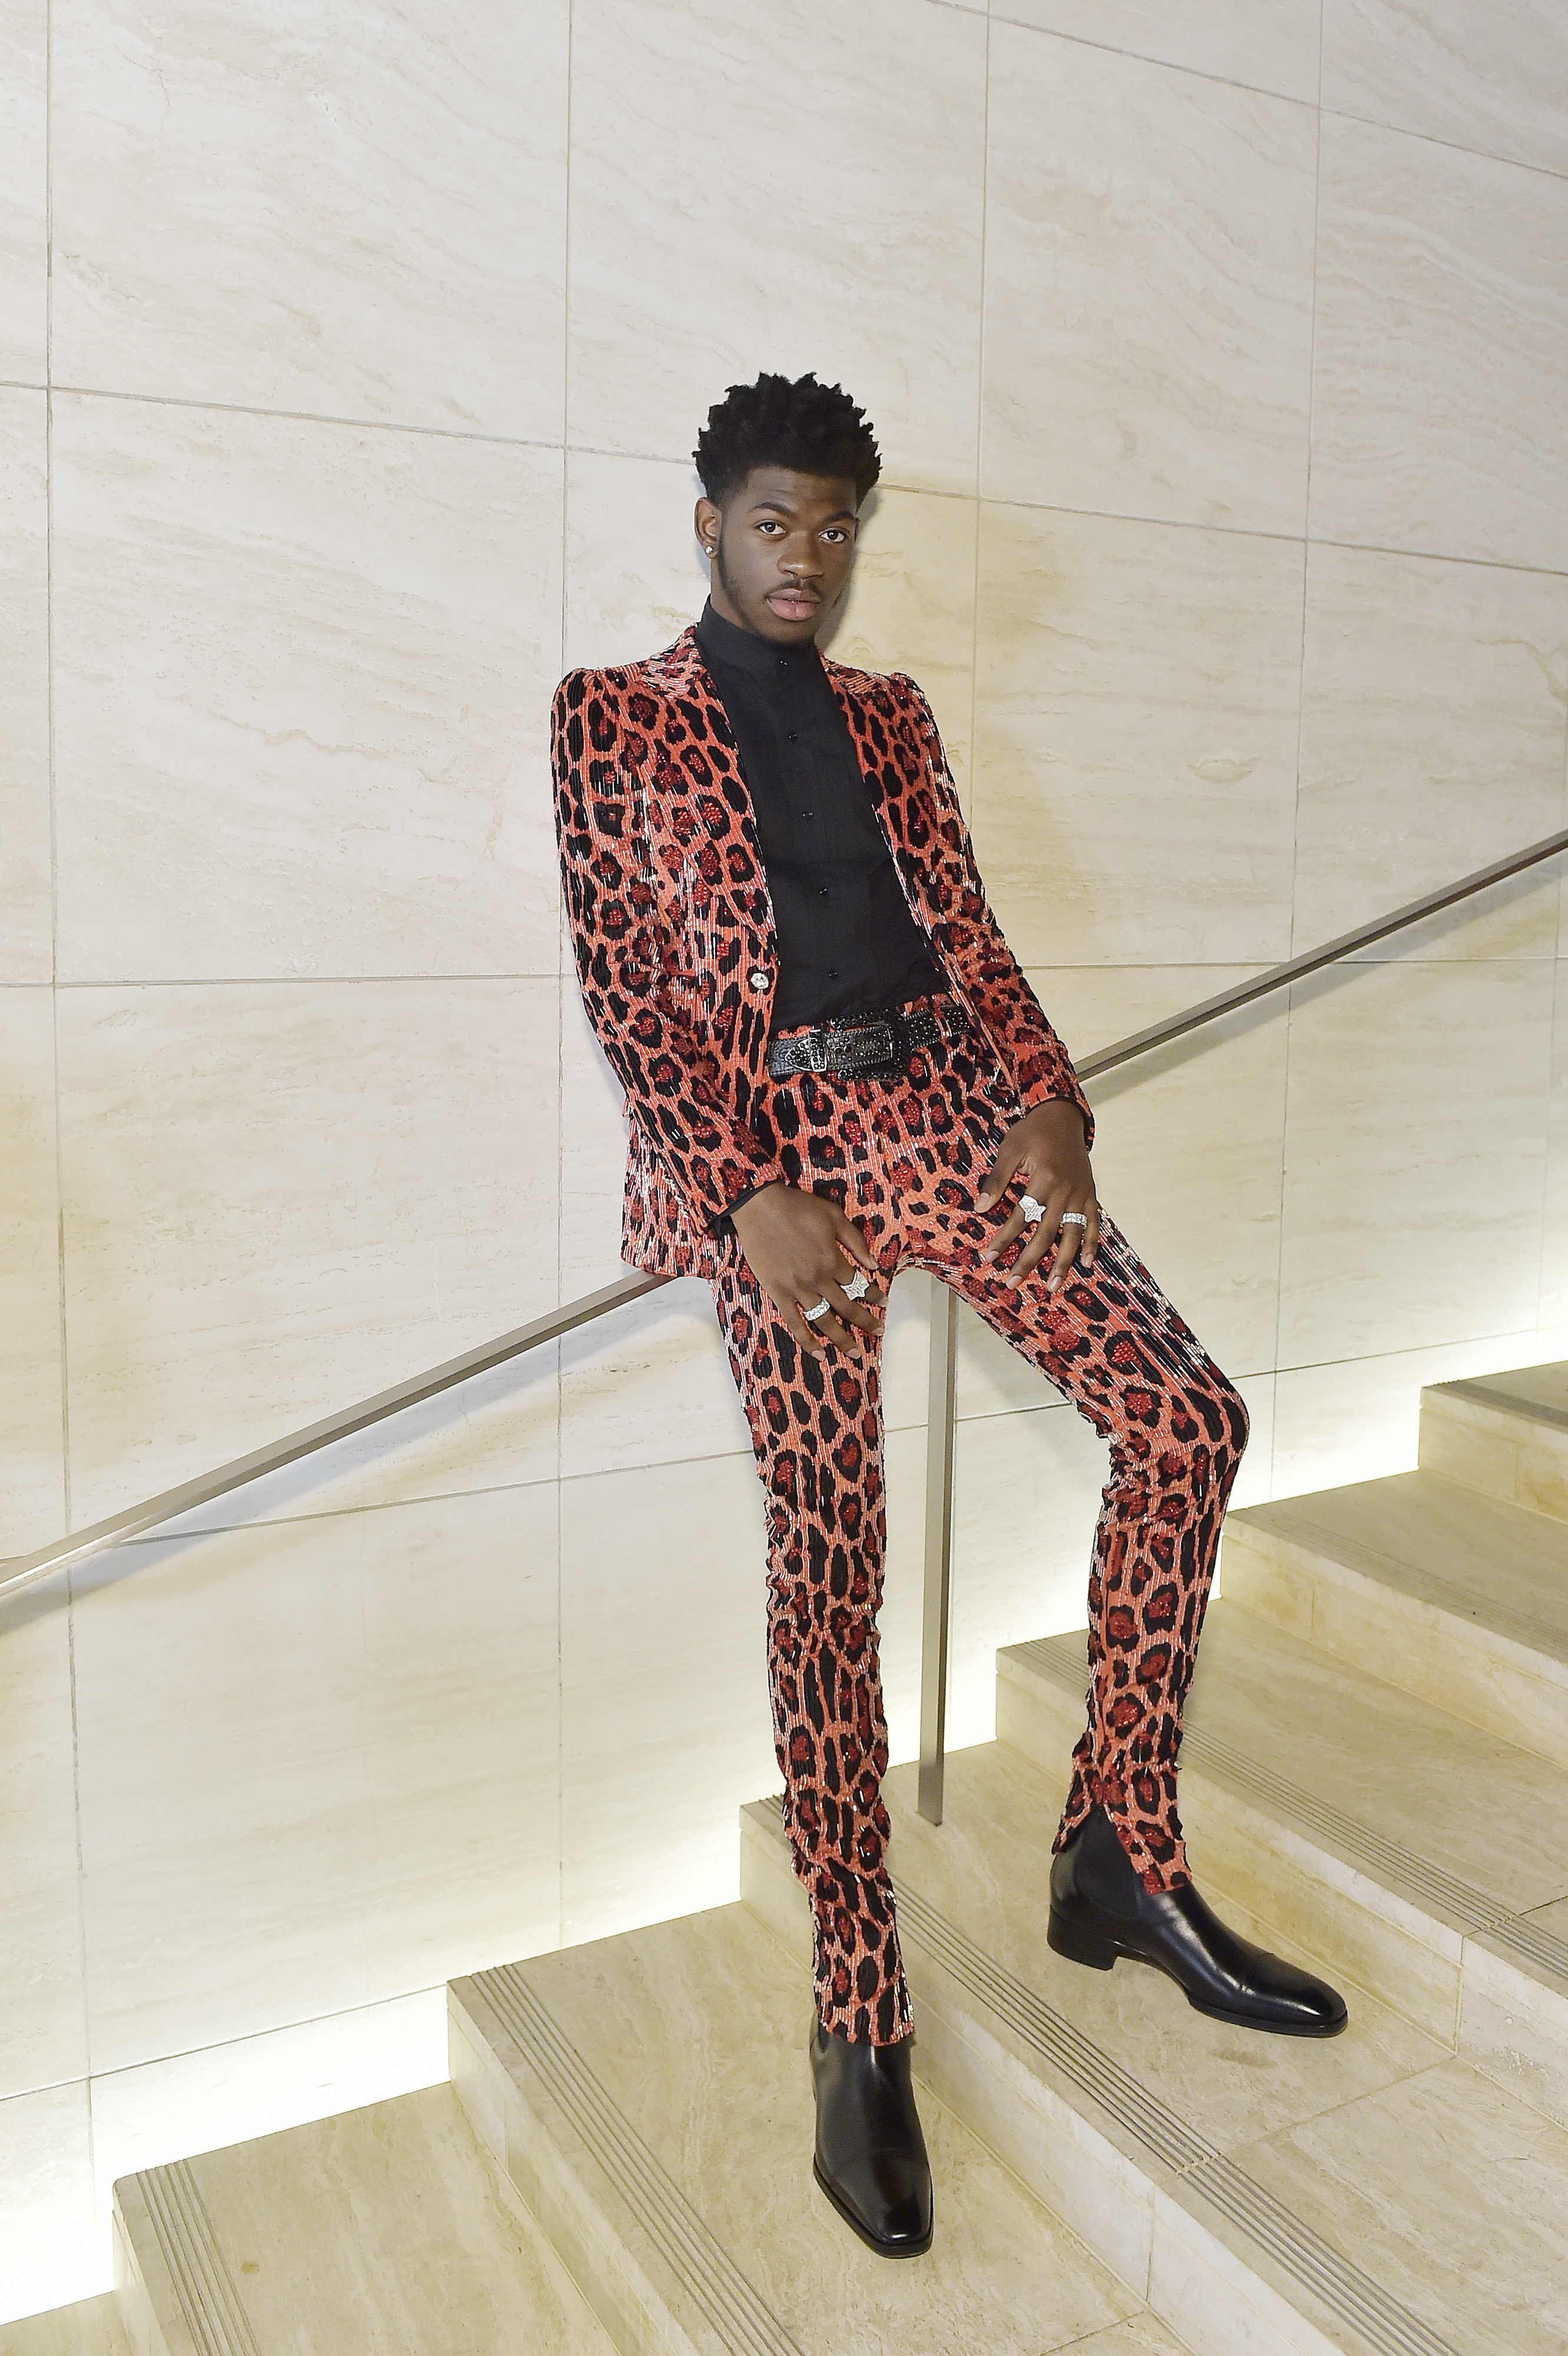 lil nas x in a cool leopard suit